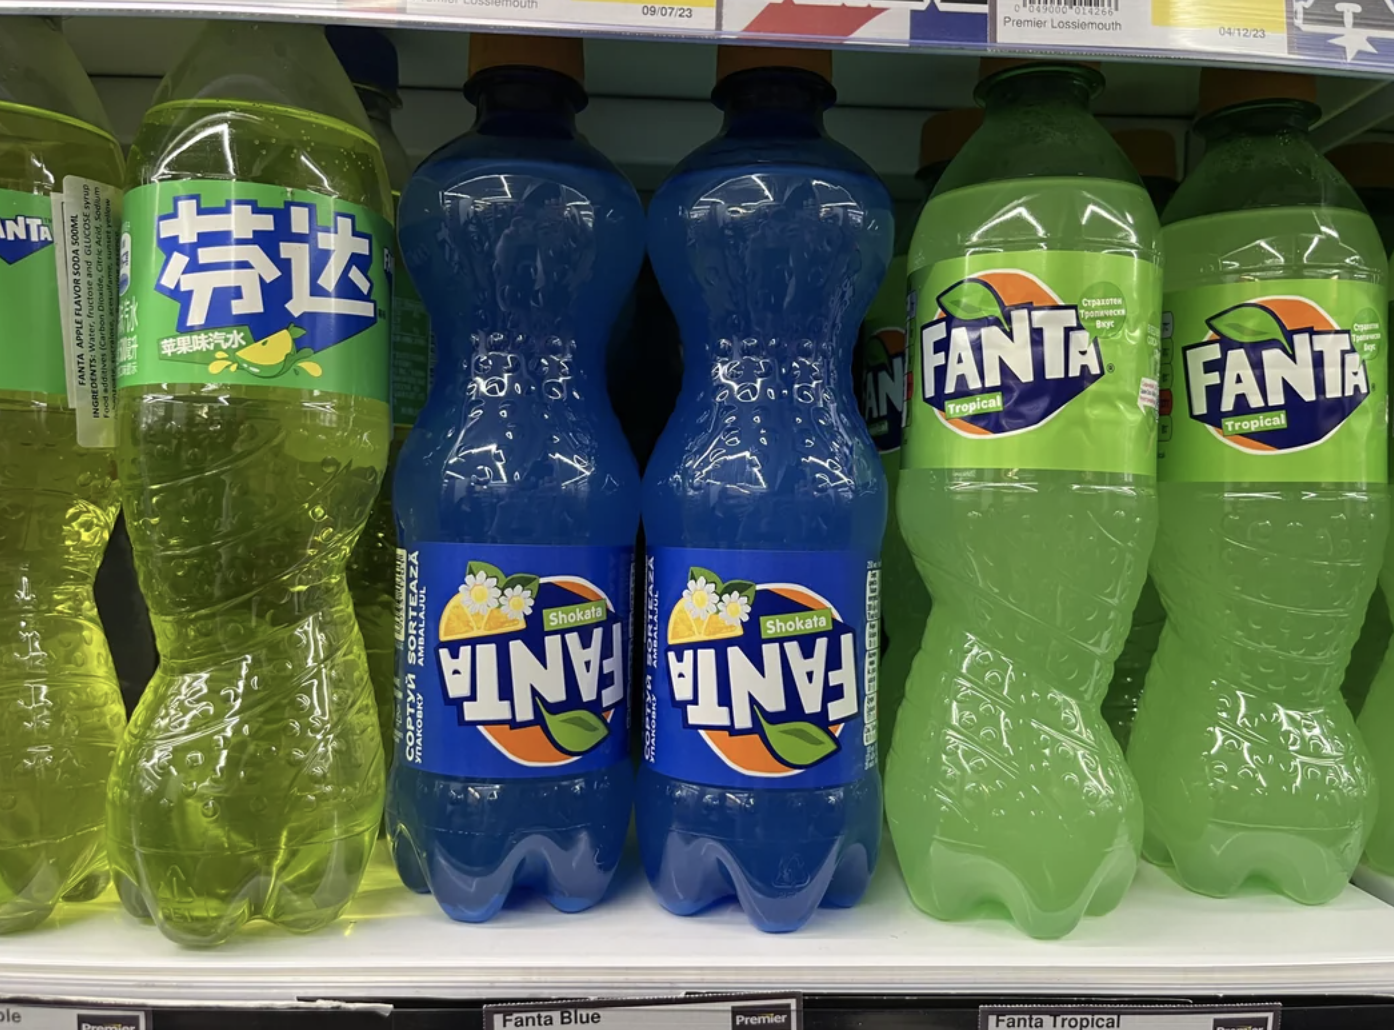 Bottles of Fanta in various flavors, including blue and tropical, on a store shelf